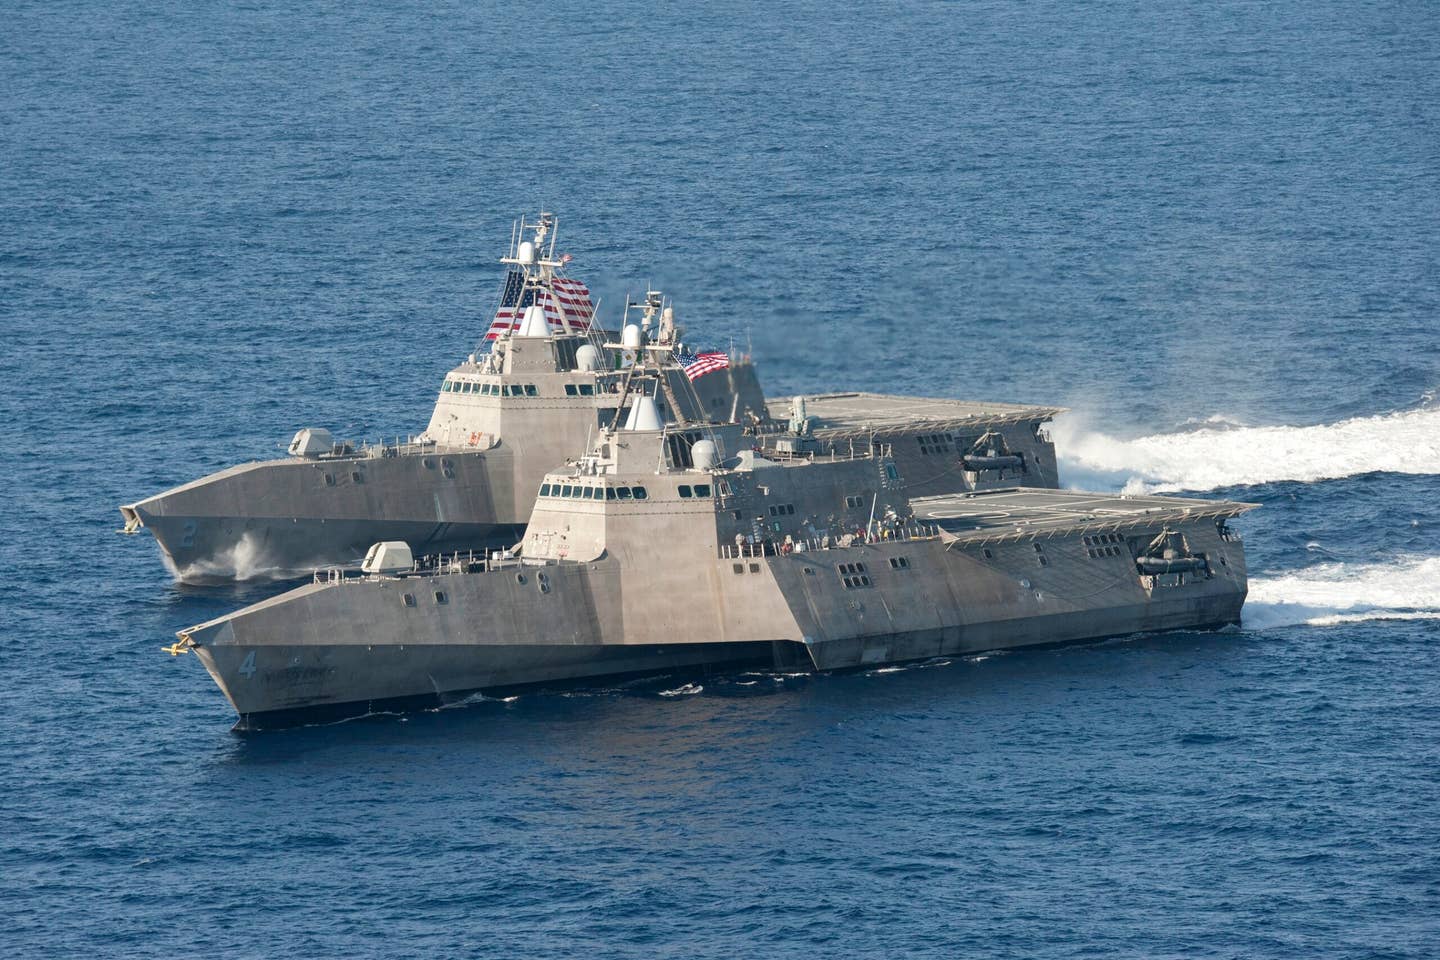 The Littoral Combat Ships USS <em>Independence</em> (LCS-2), back, and USS <em>Coronado</em> (LCS-4) underway in the Pacific Ocean in April 2014. <em>U.S. Navy photo by Chief Mass Communication Specialist Keith DeVinney/Released</em>